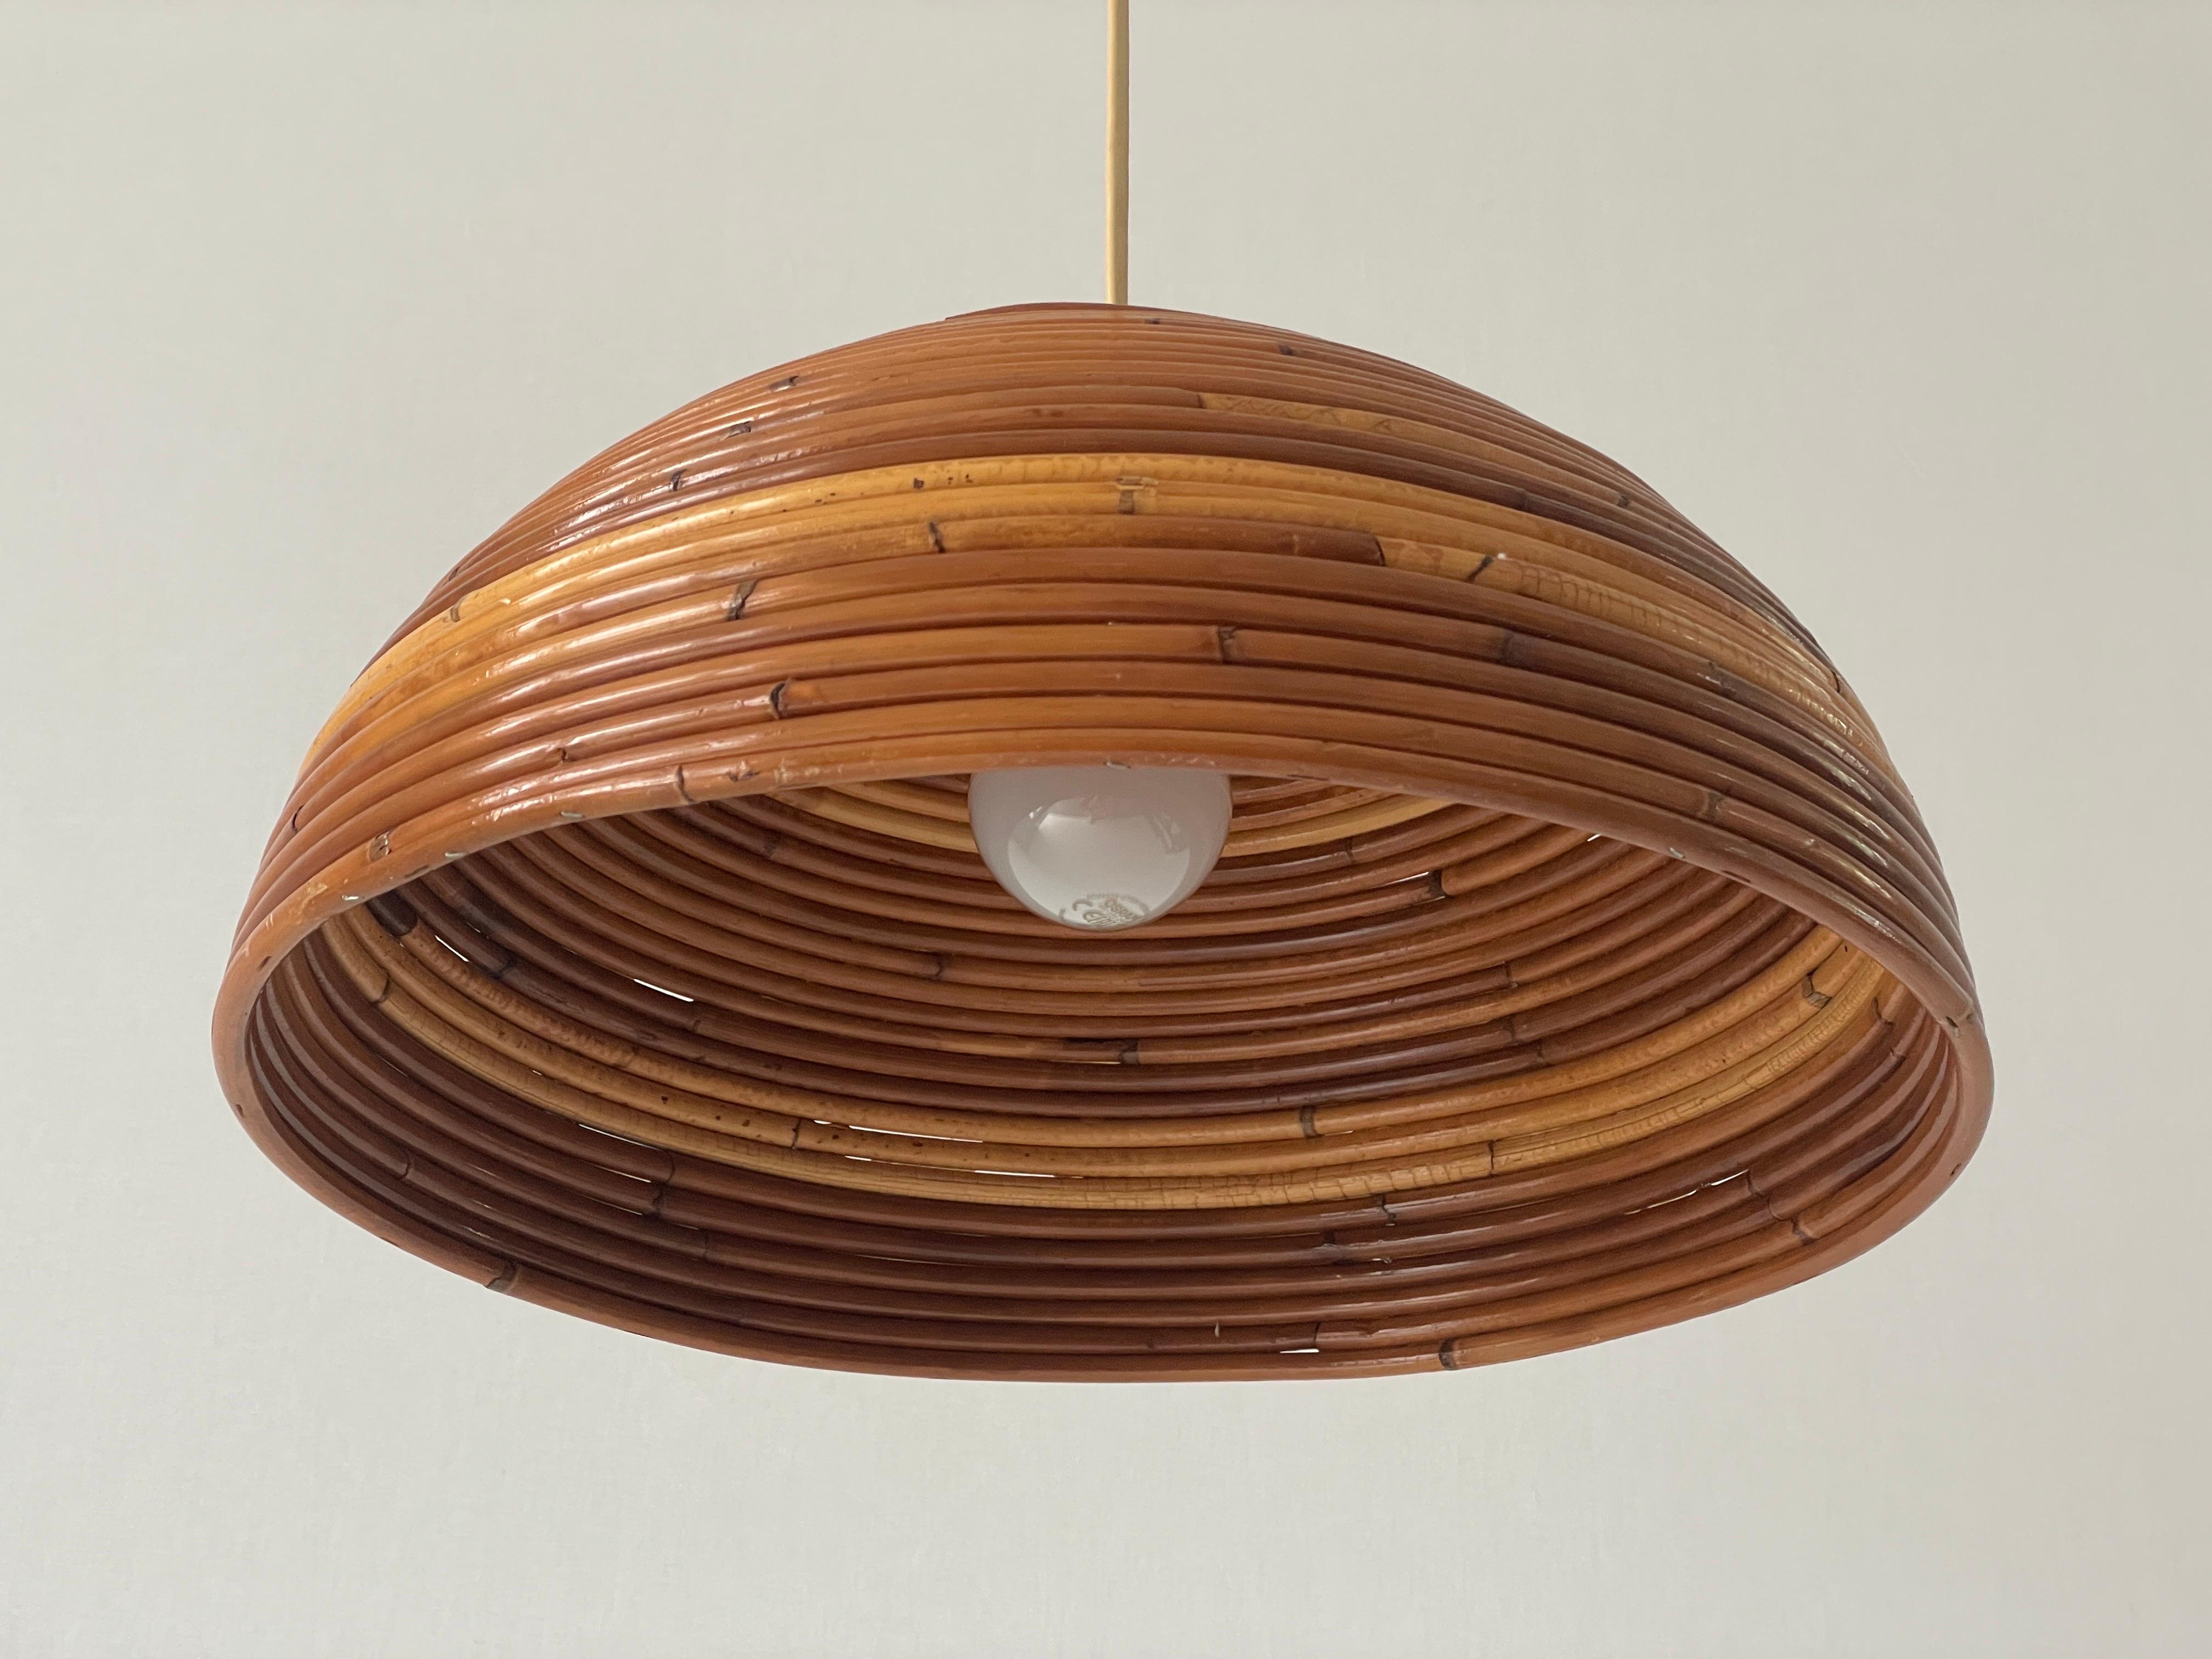 Mushroom Shaped Bamboo Pendant Lamp, 1960s, Germany

This lamp works with E27 light bulbs. 
Wired and suitable to use with 220V and 110V for all countries.

Measurements: 
Height: 90 cm
Shade diameter and height: 38 cm and 20 cm

